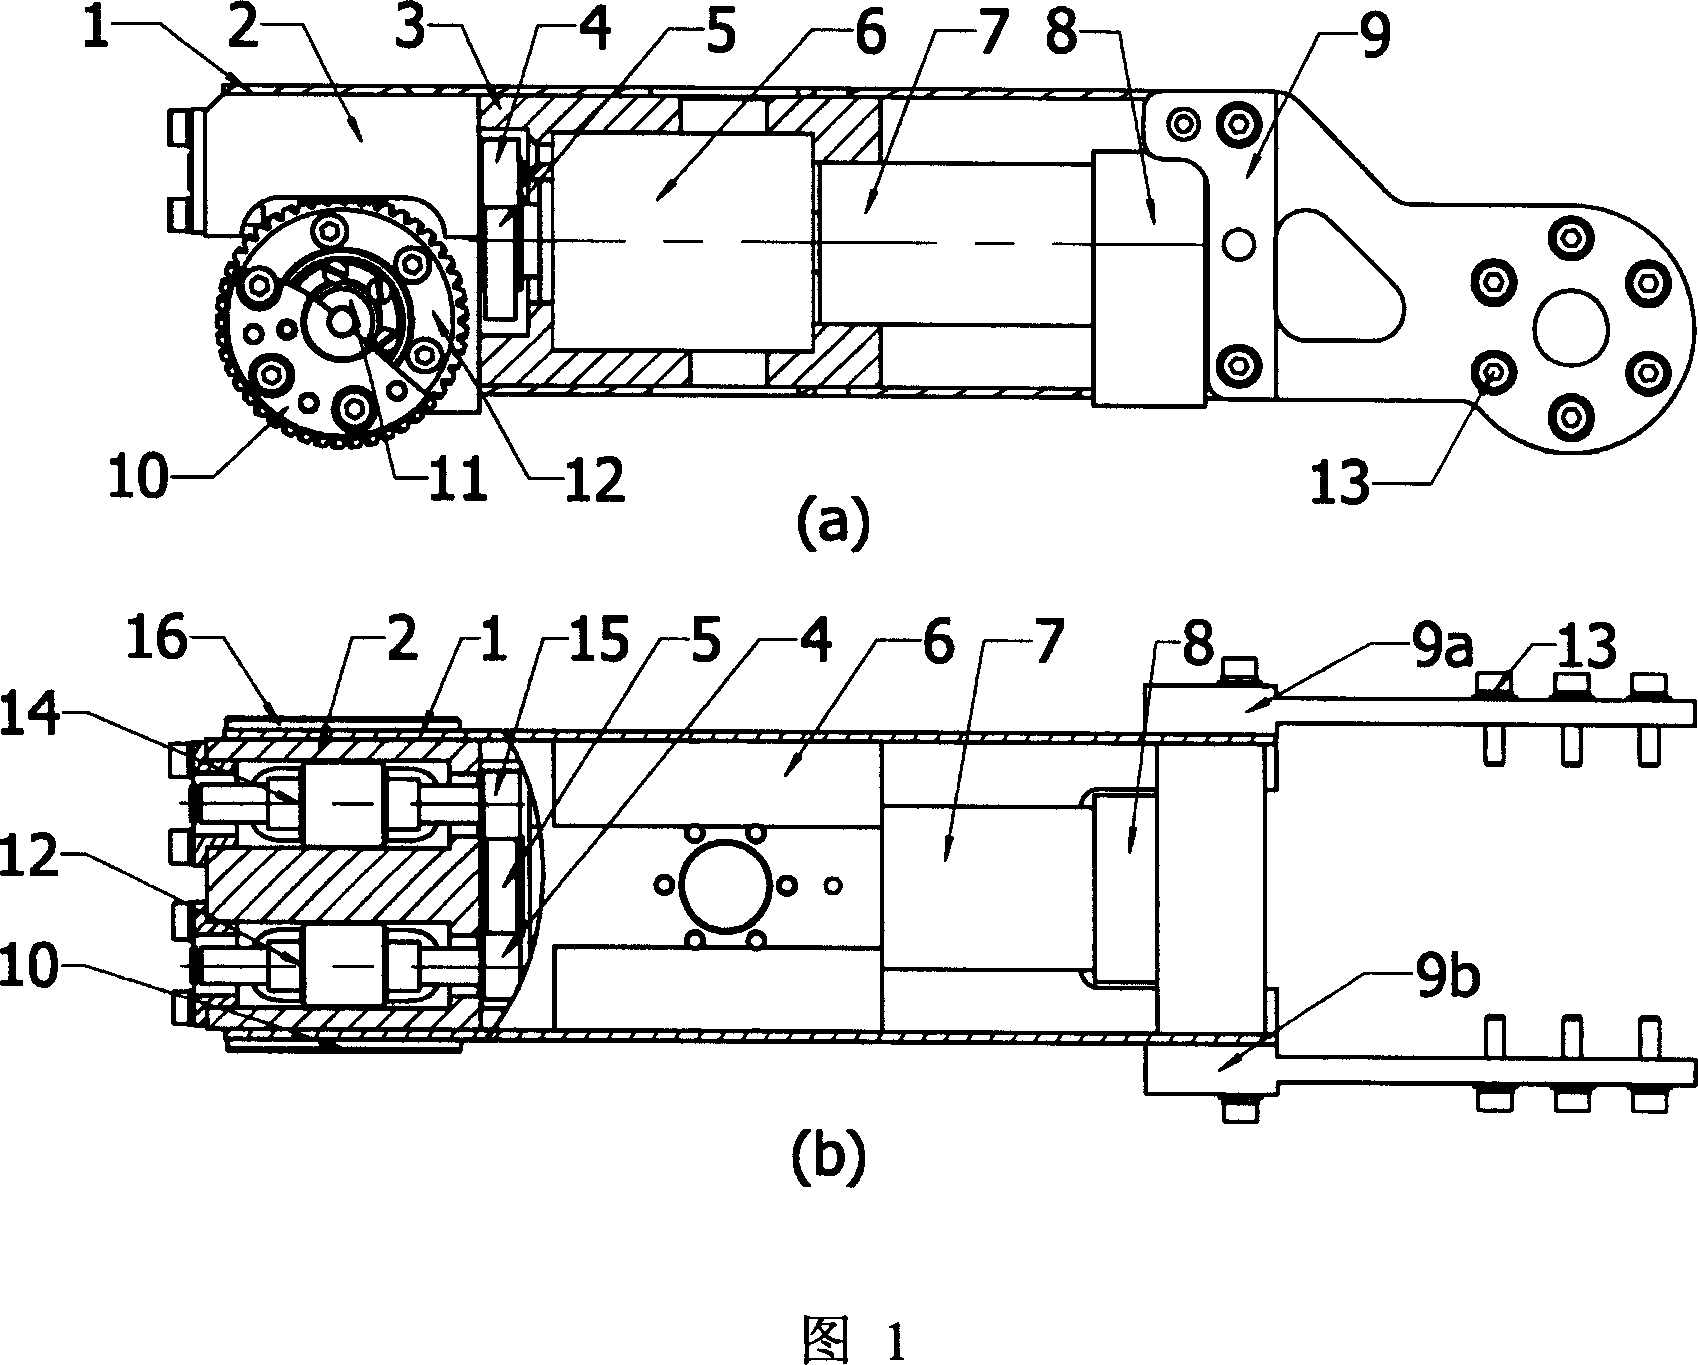 Combinable robot article and its constituted foot unit